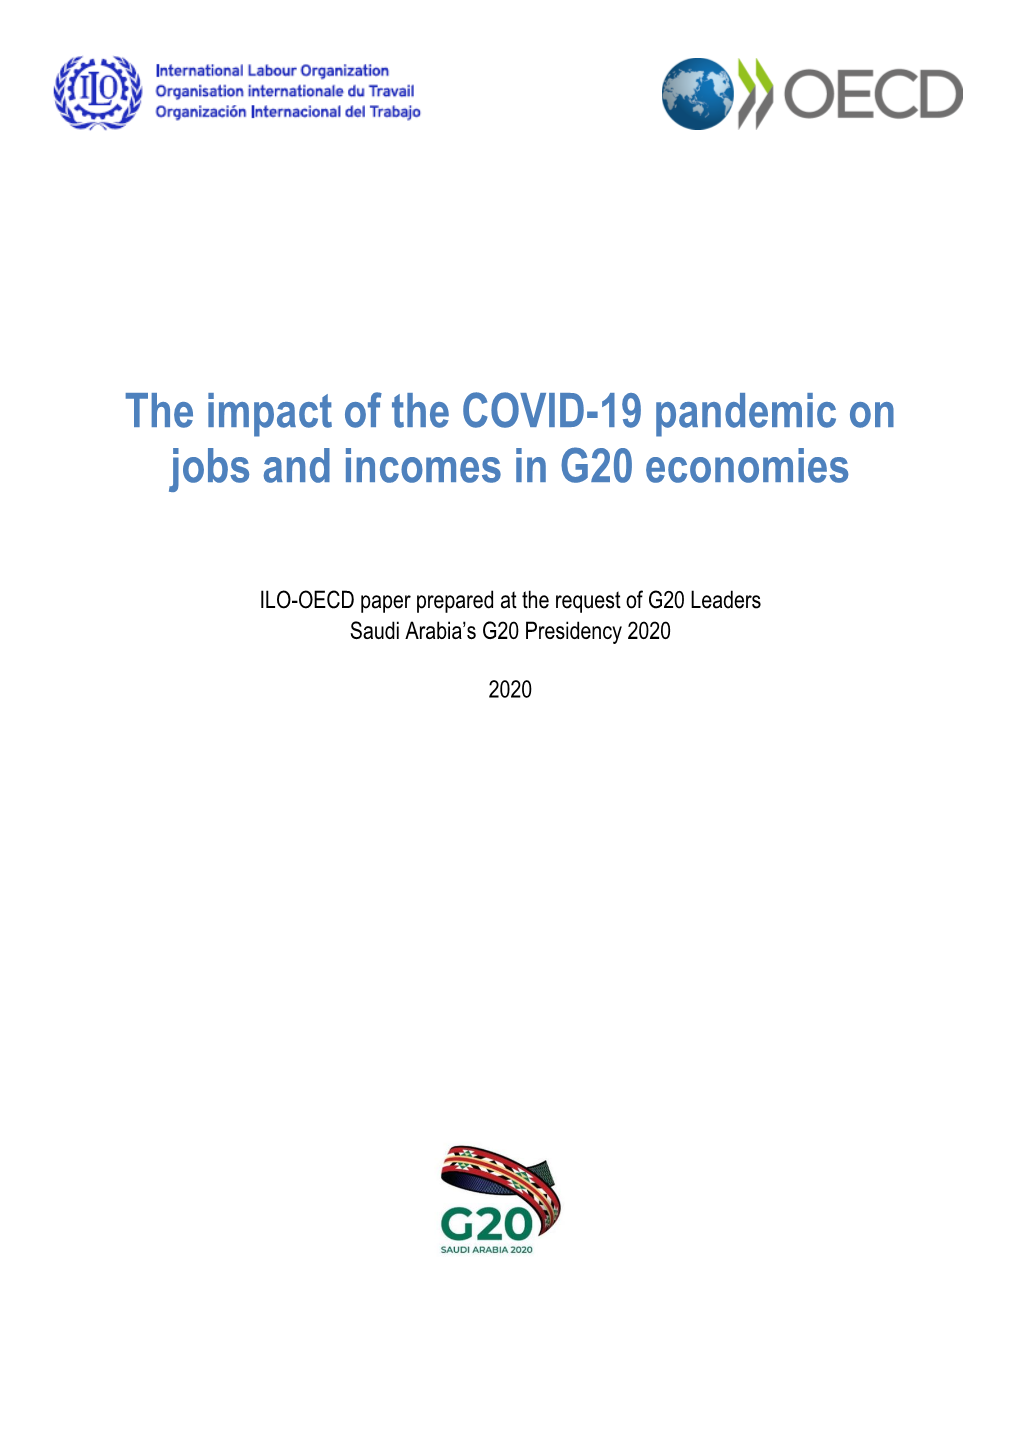 The Impact of the COVID-19 Pandemic on Jobs and Incomes in G20 Economies